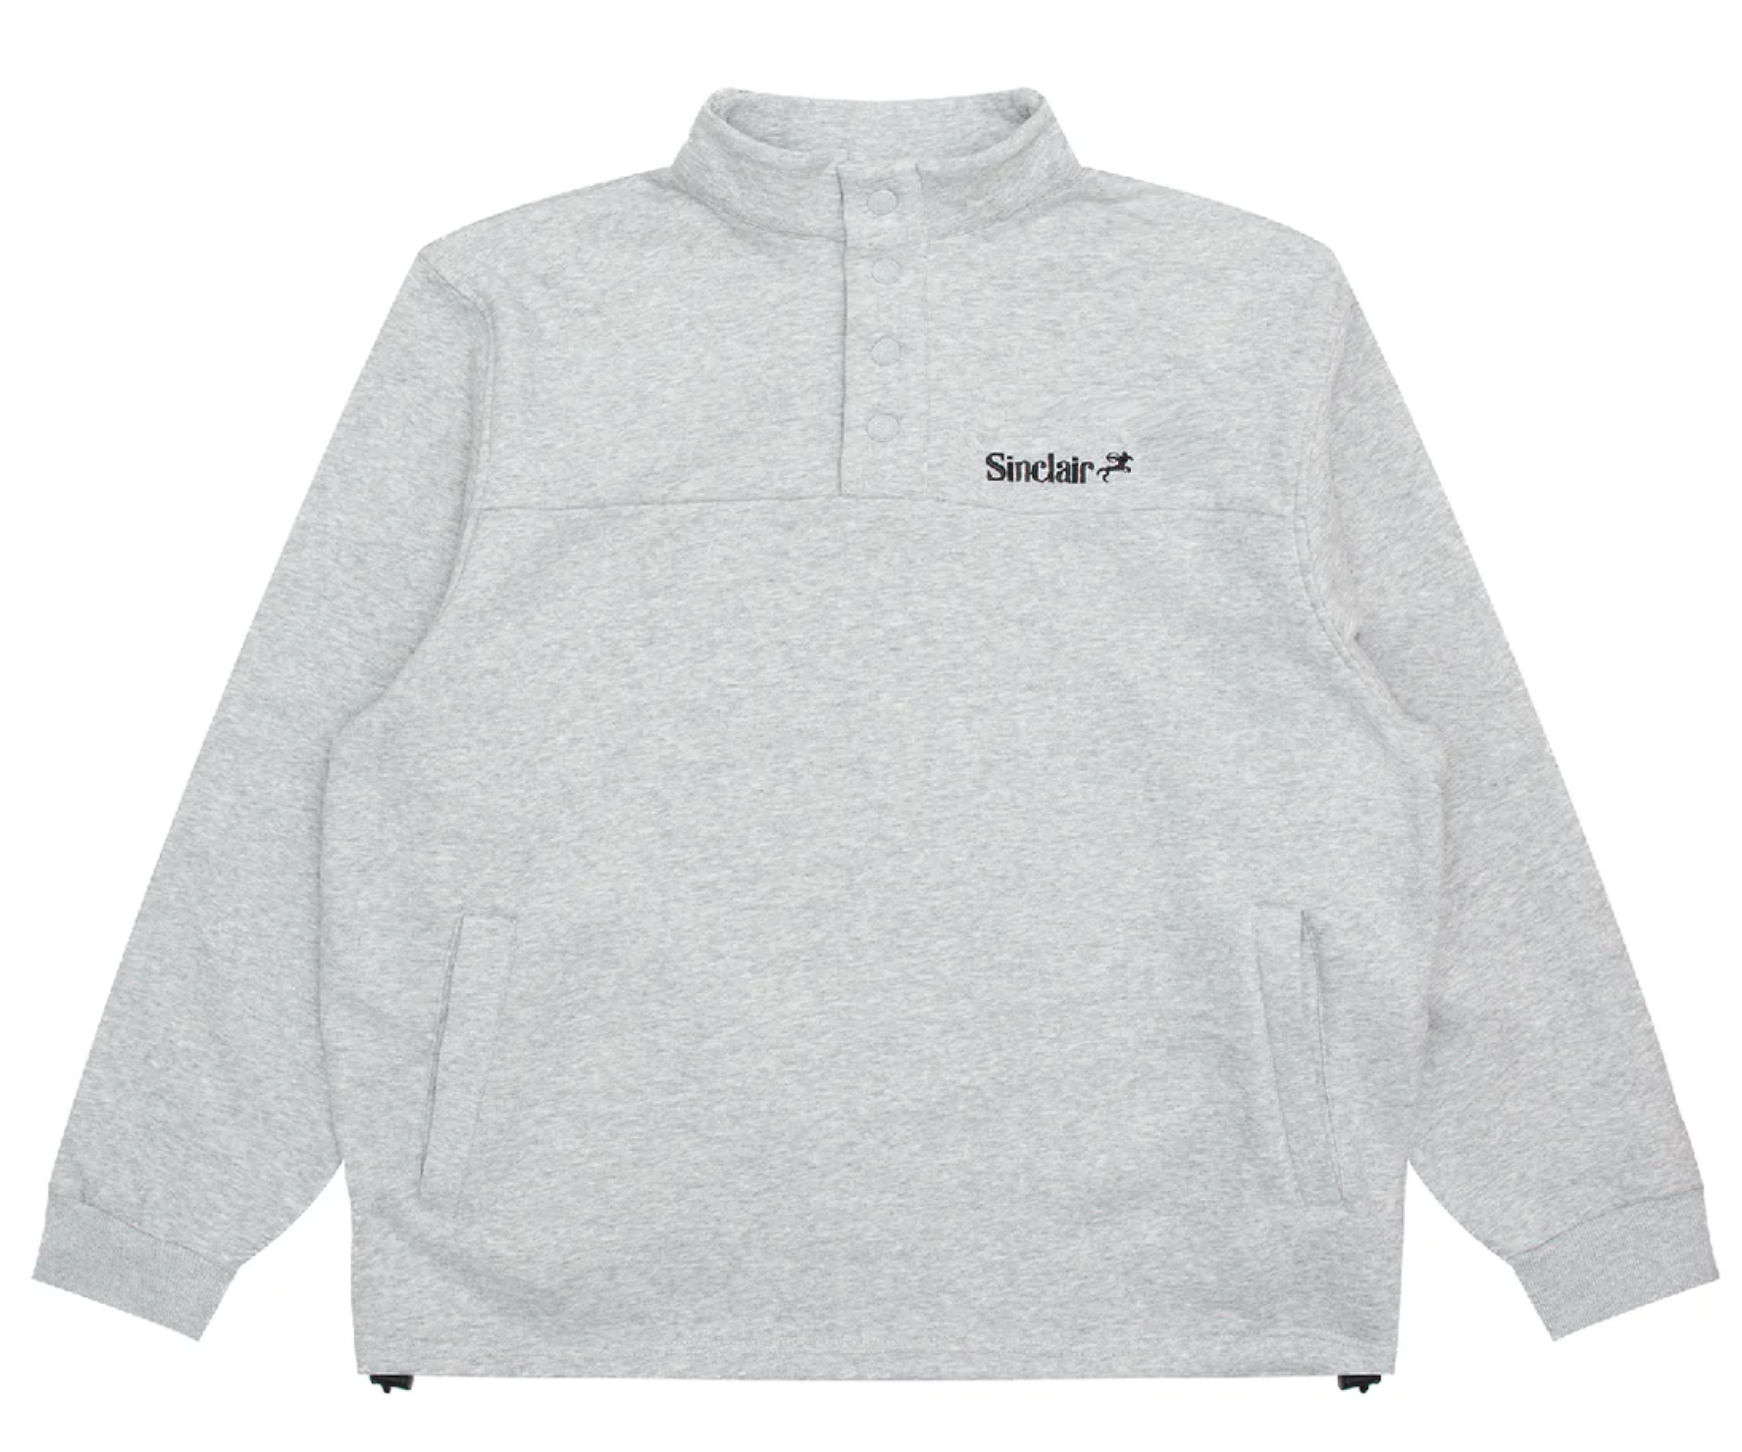 Sinclair Texture Pullover Heather Grey